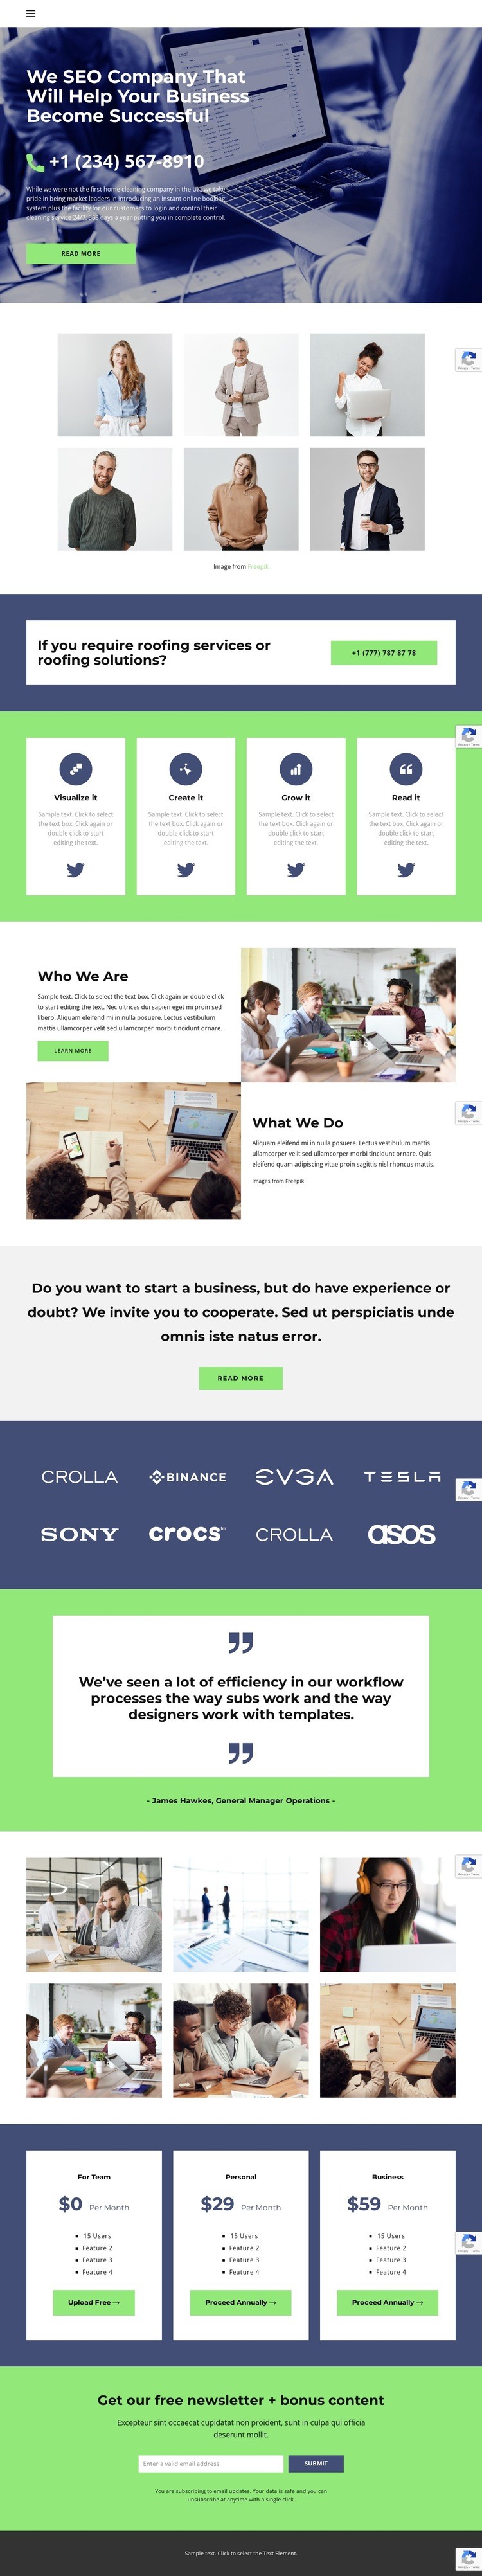 Business in crisis Web Page Design